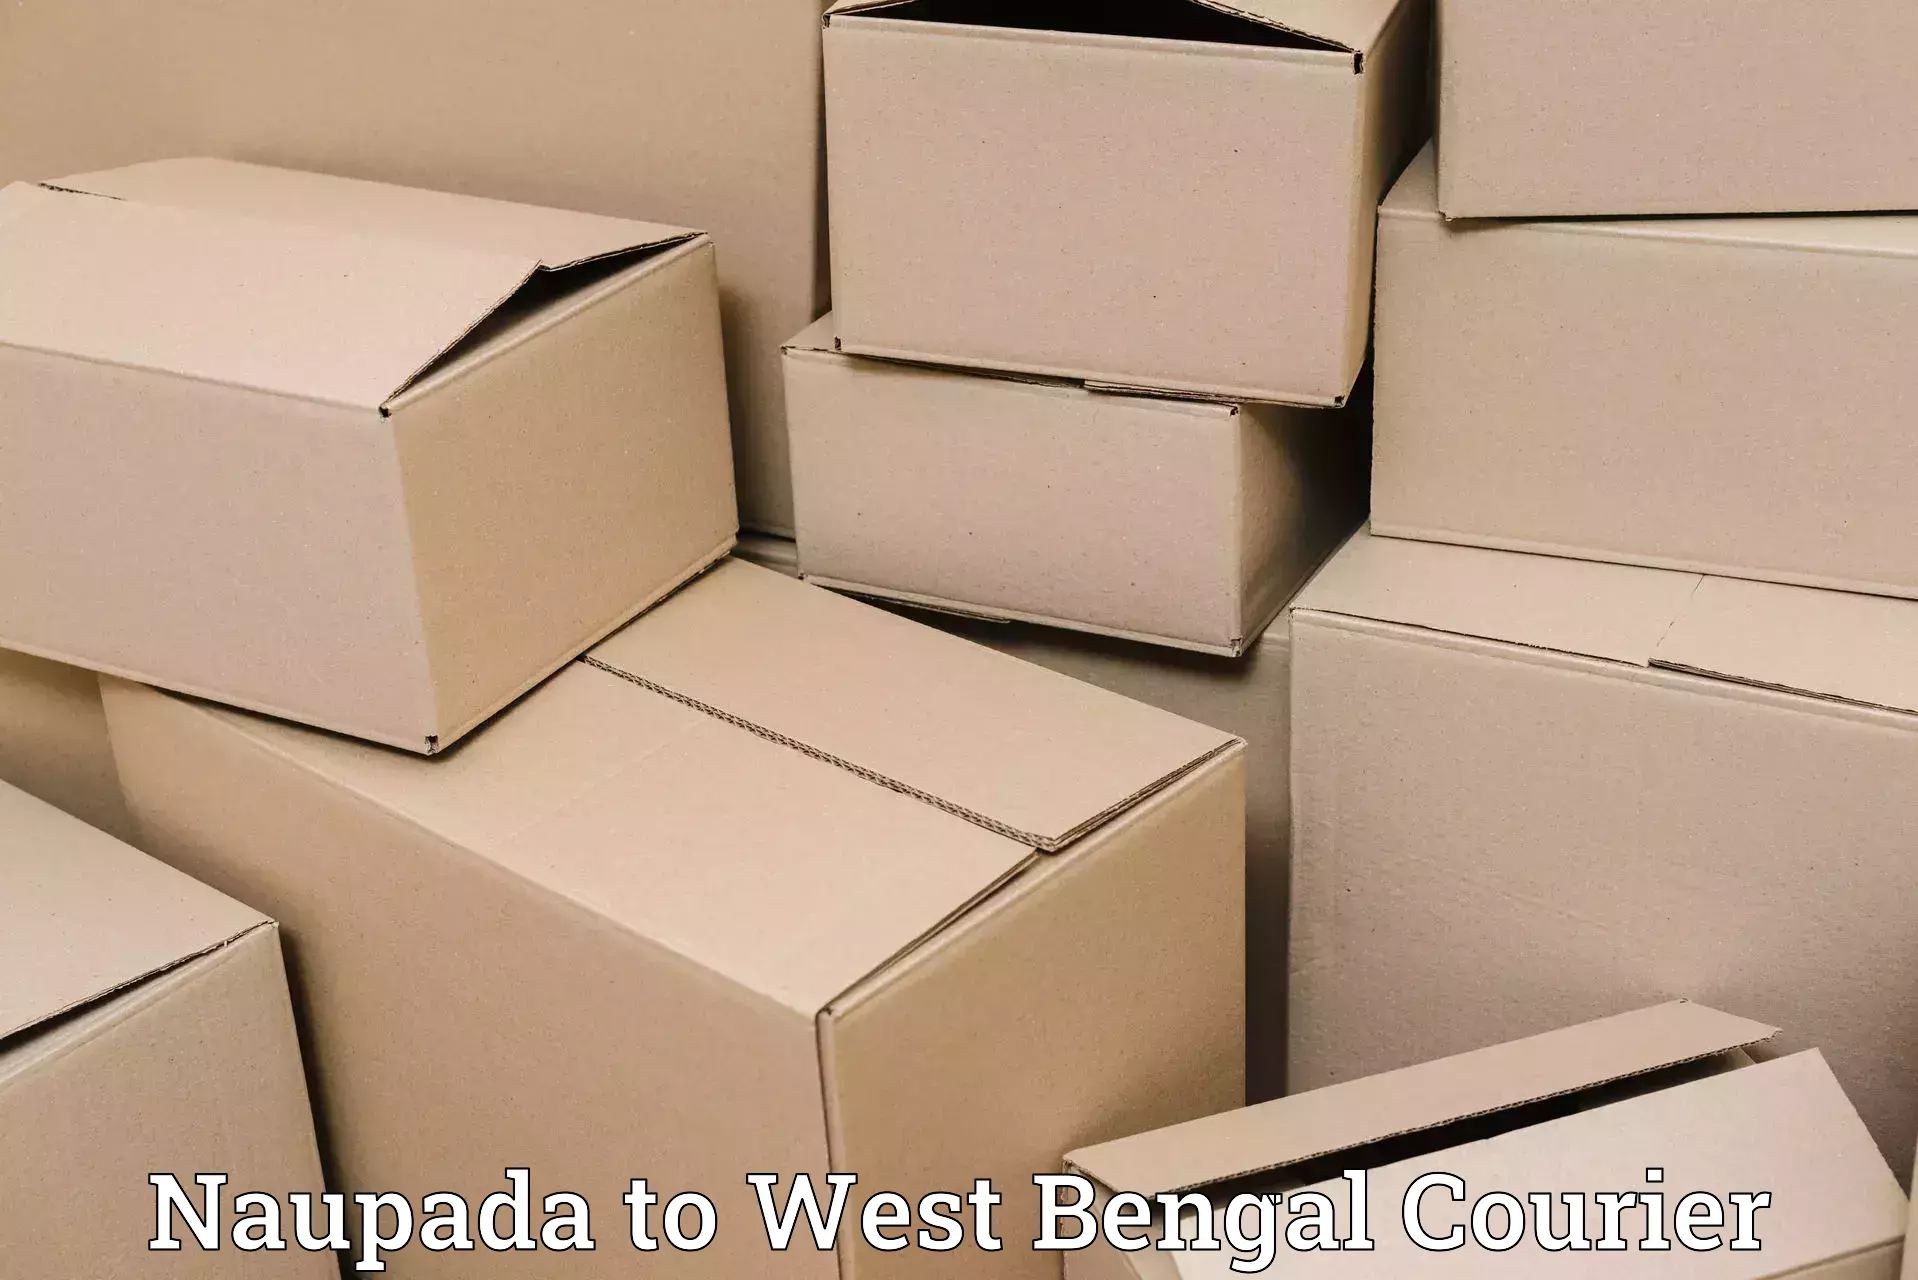 Fastest parcel delivery in Naupada to Barrackpore